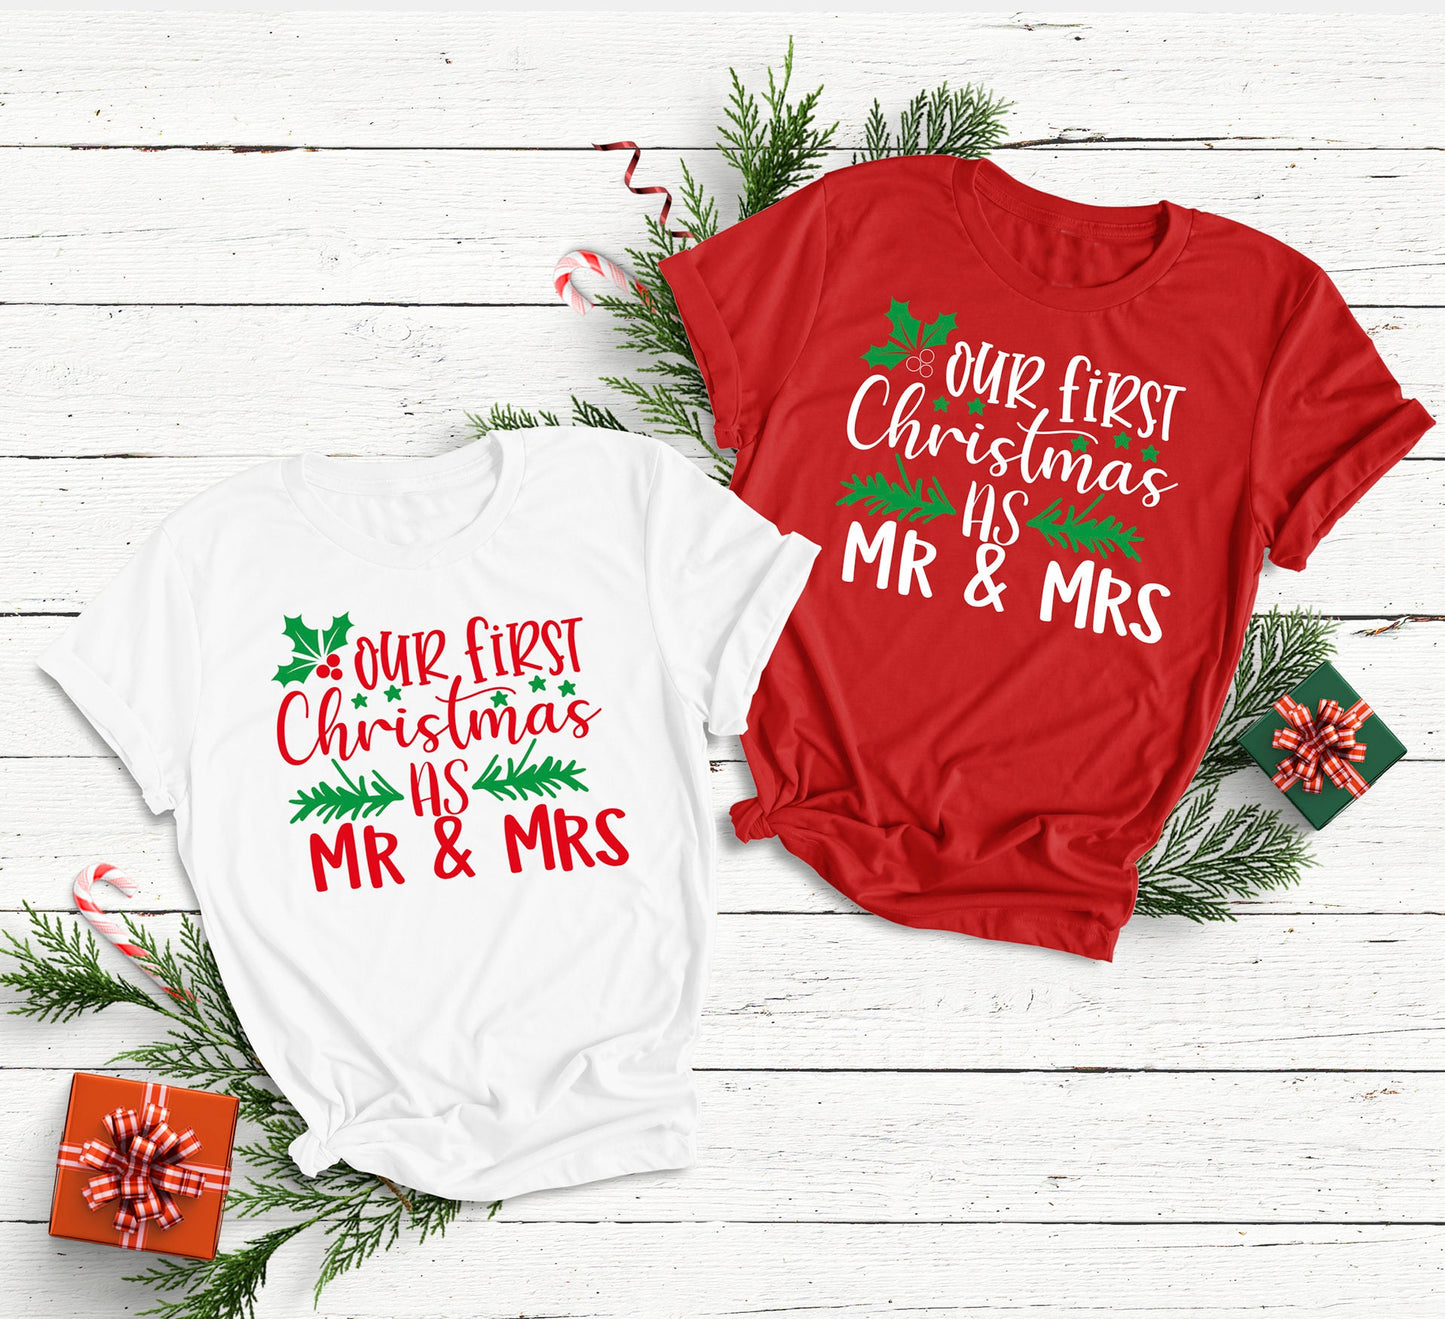 Our First Christmas as Mr & Mrs T-Shirt - Christmas Wedding tshirt for couples | Married Newlyweds